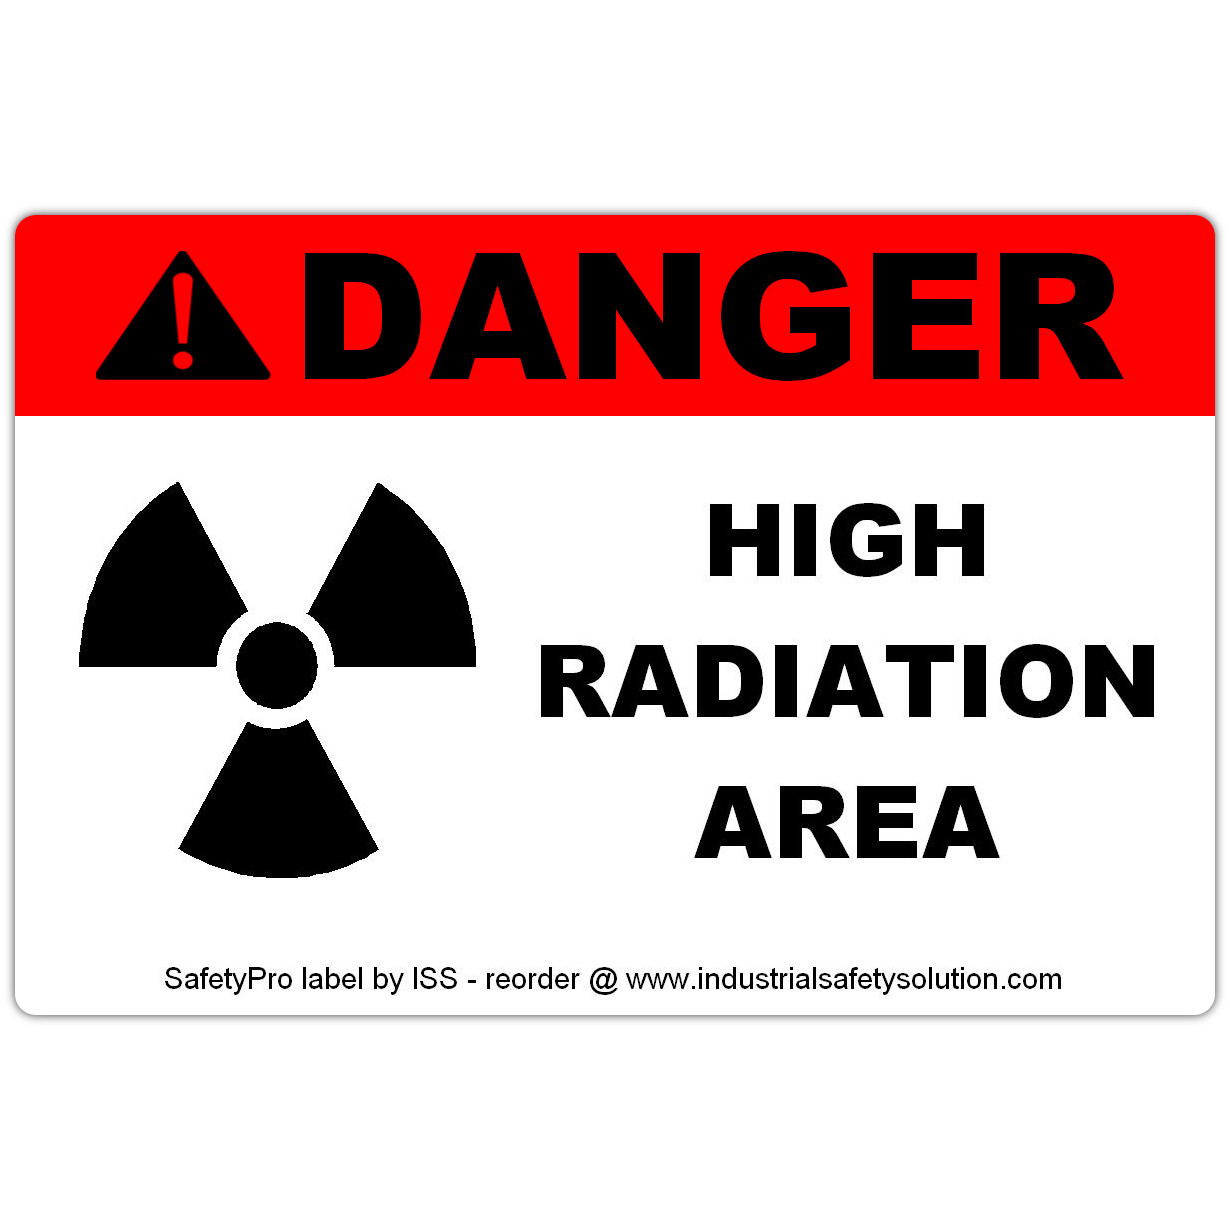 Ask a question about 4" x 6" DANGER High Radiation Safety Label